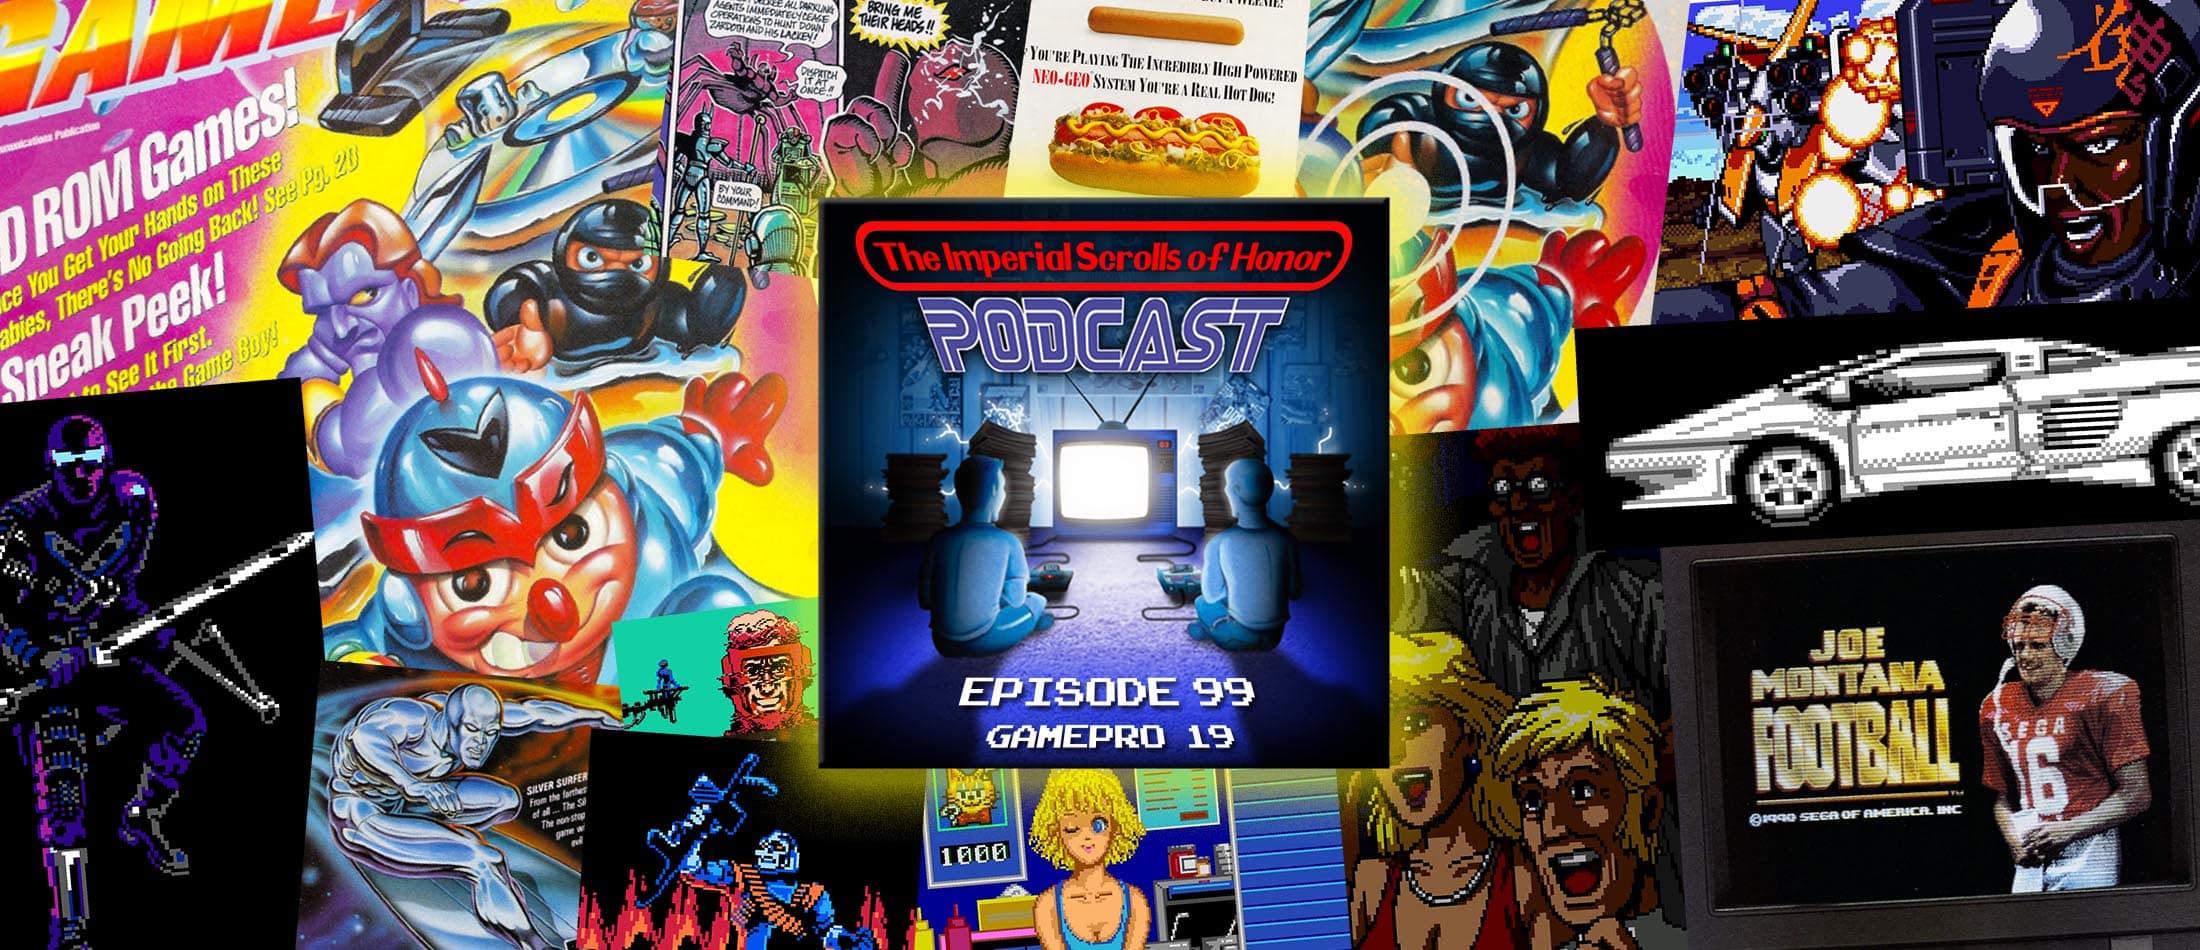 The Imperial Scrolls of Honor Podcast - Ep 99 - GamePro #19